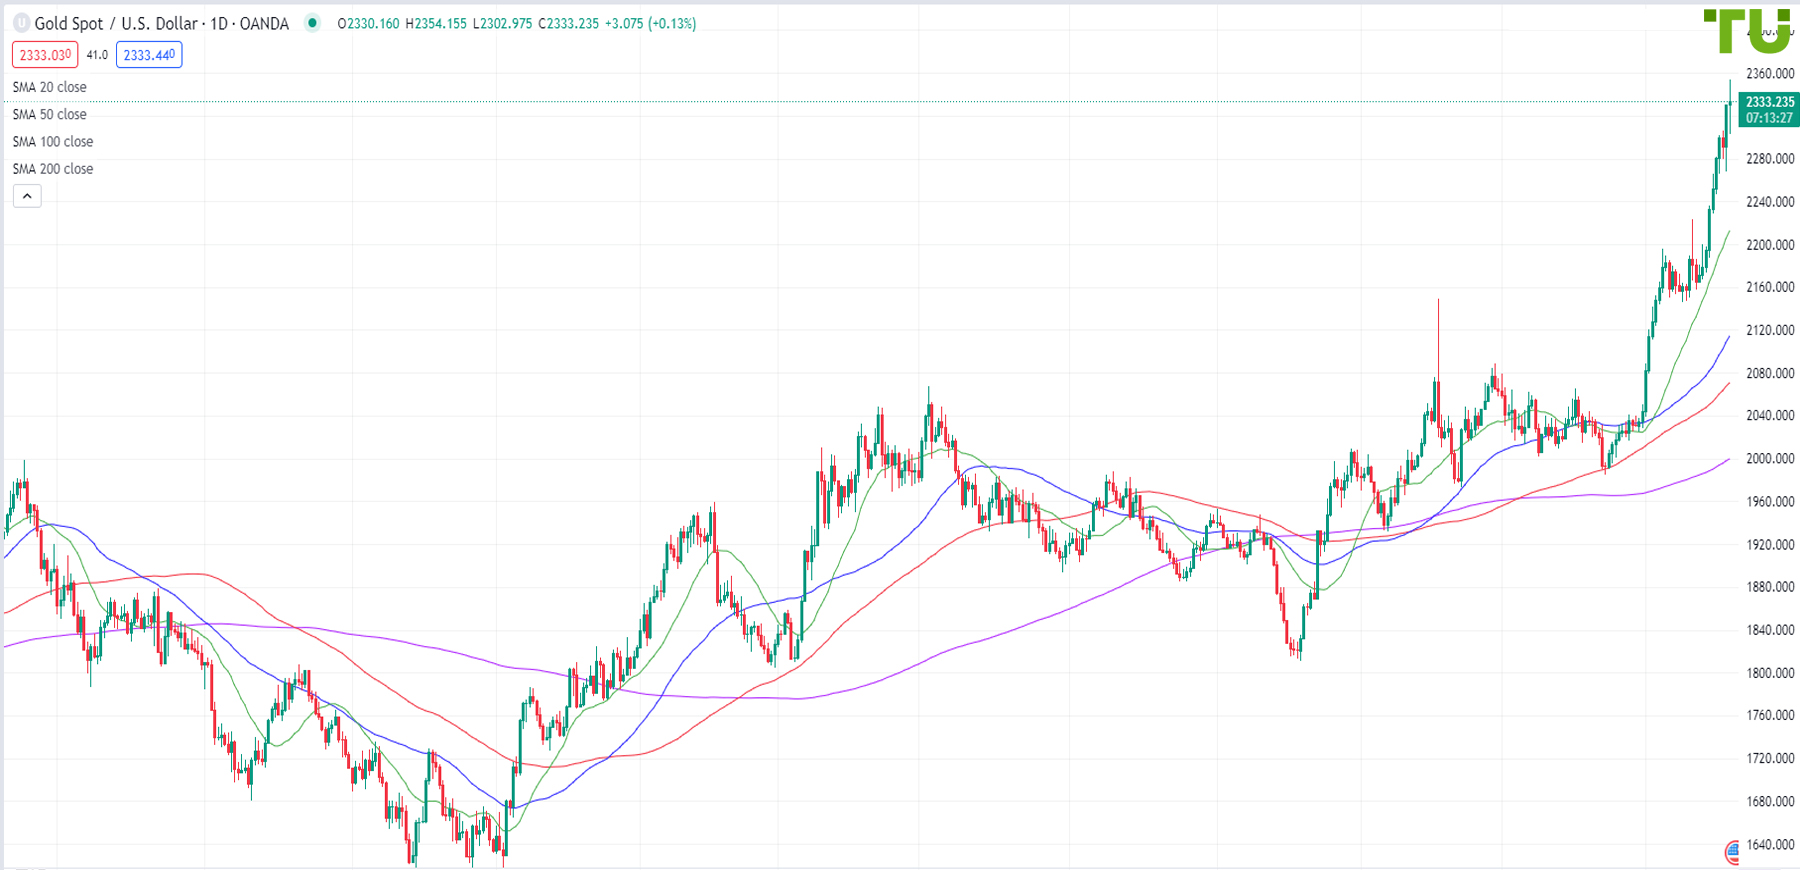 XAU/USD moves higher, correction risks rise